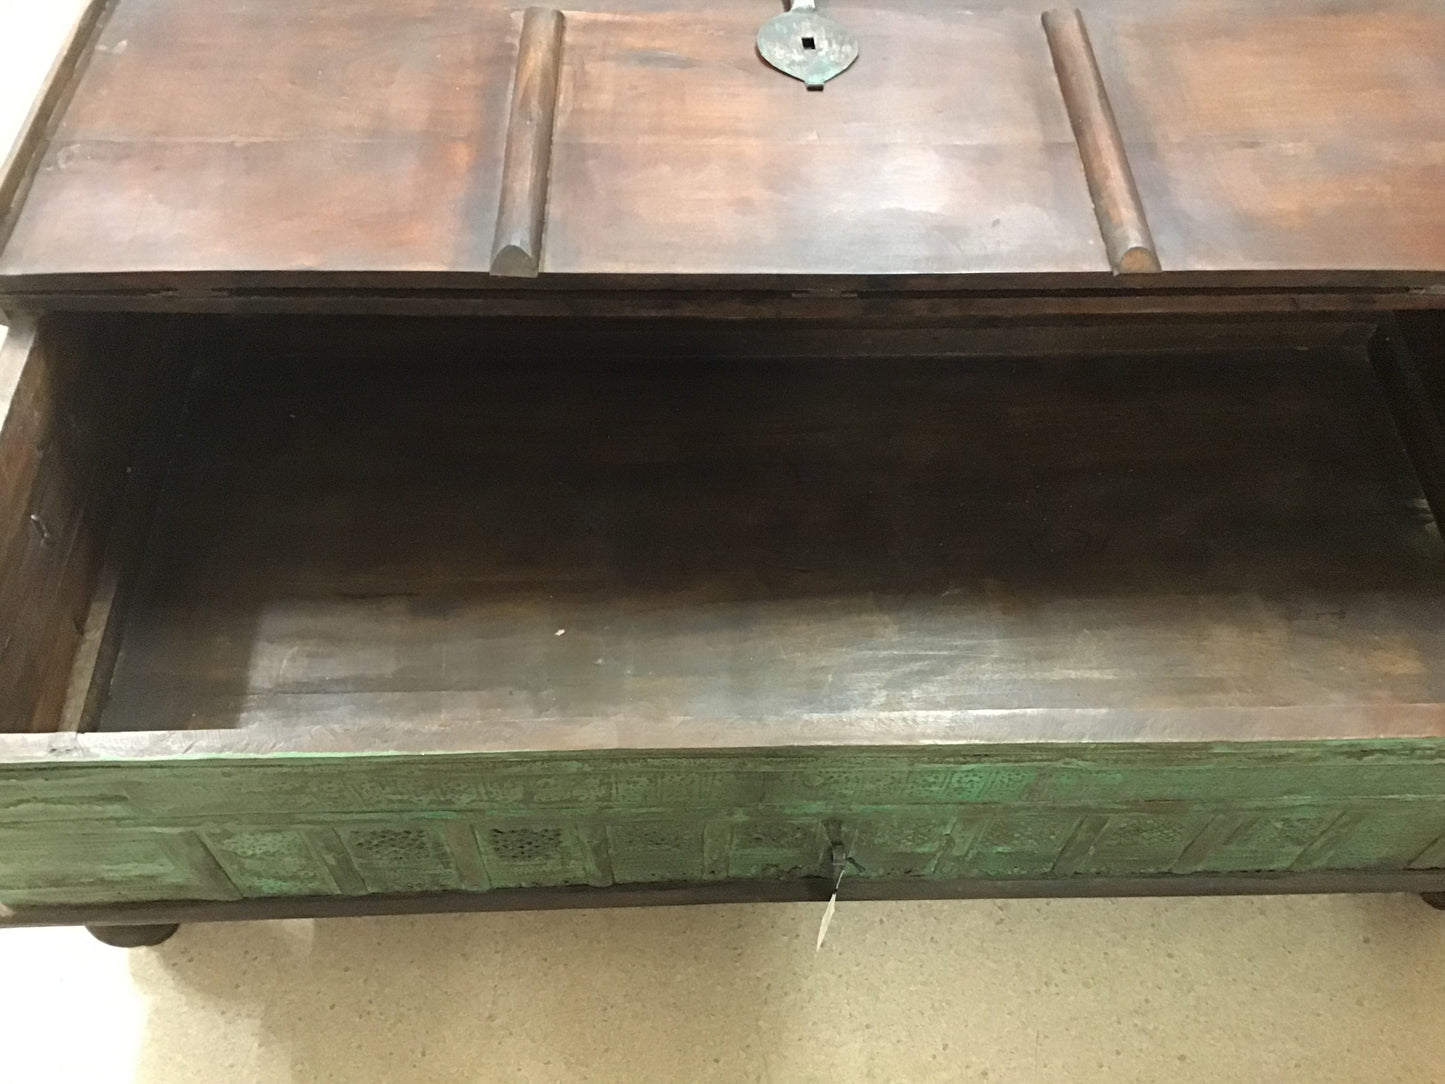 Coffee table chest